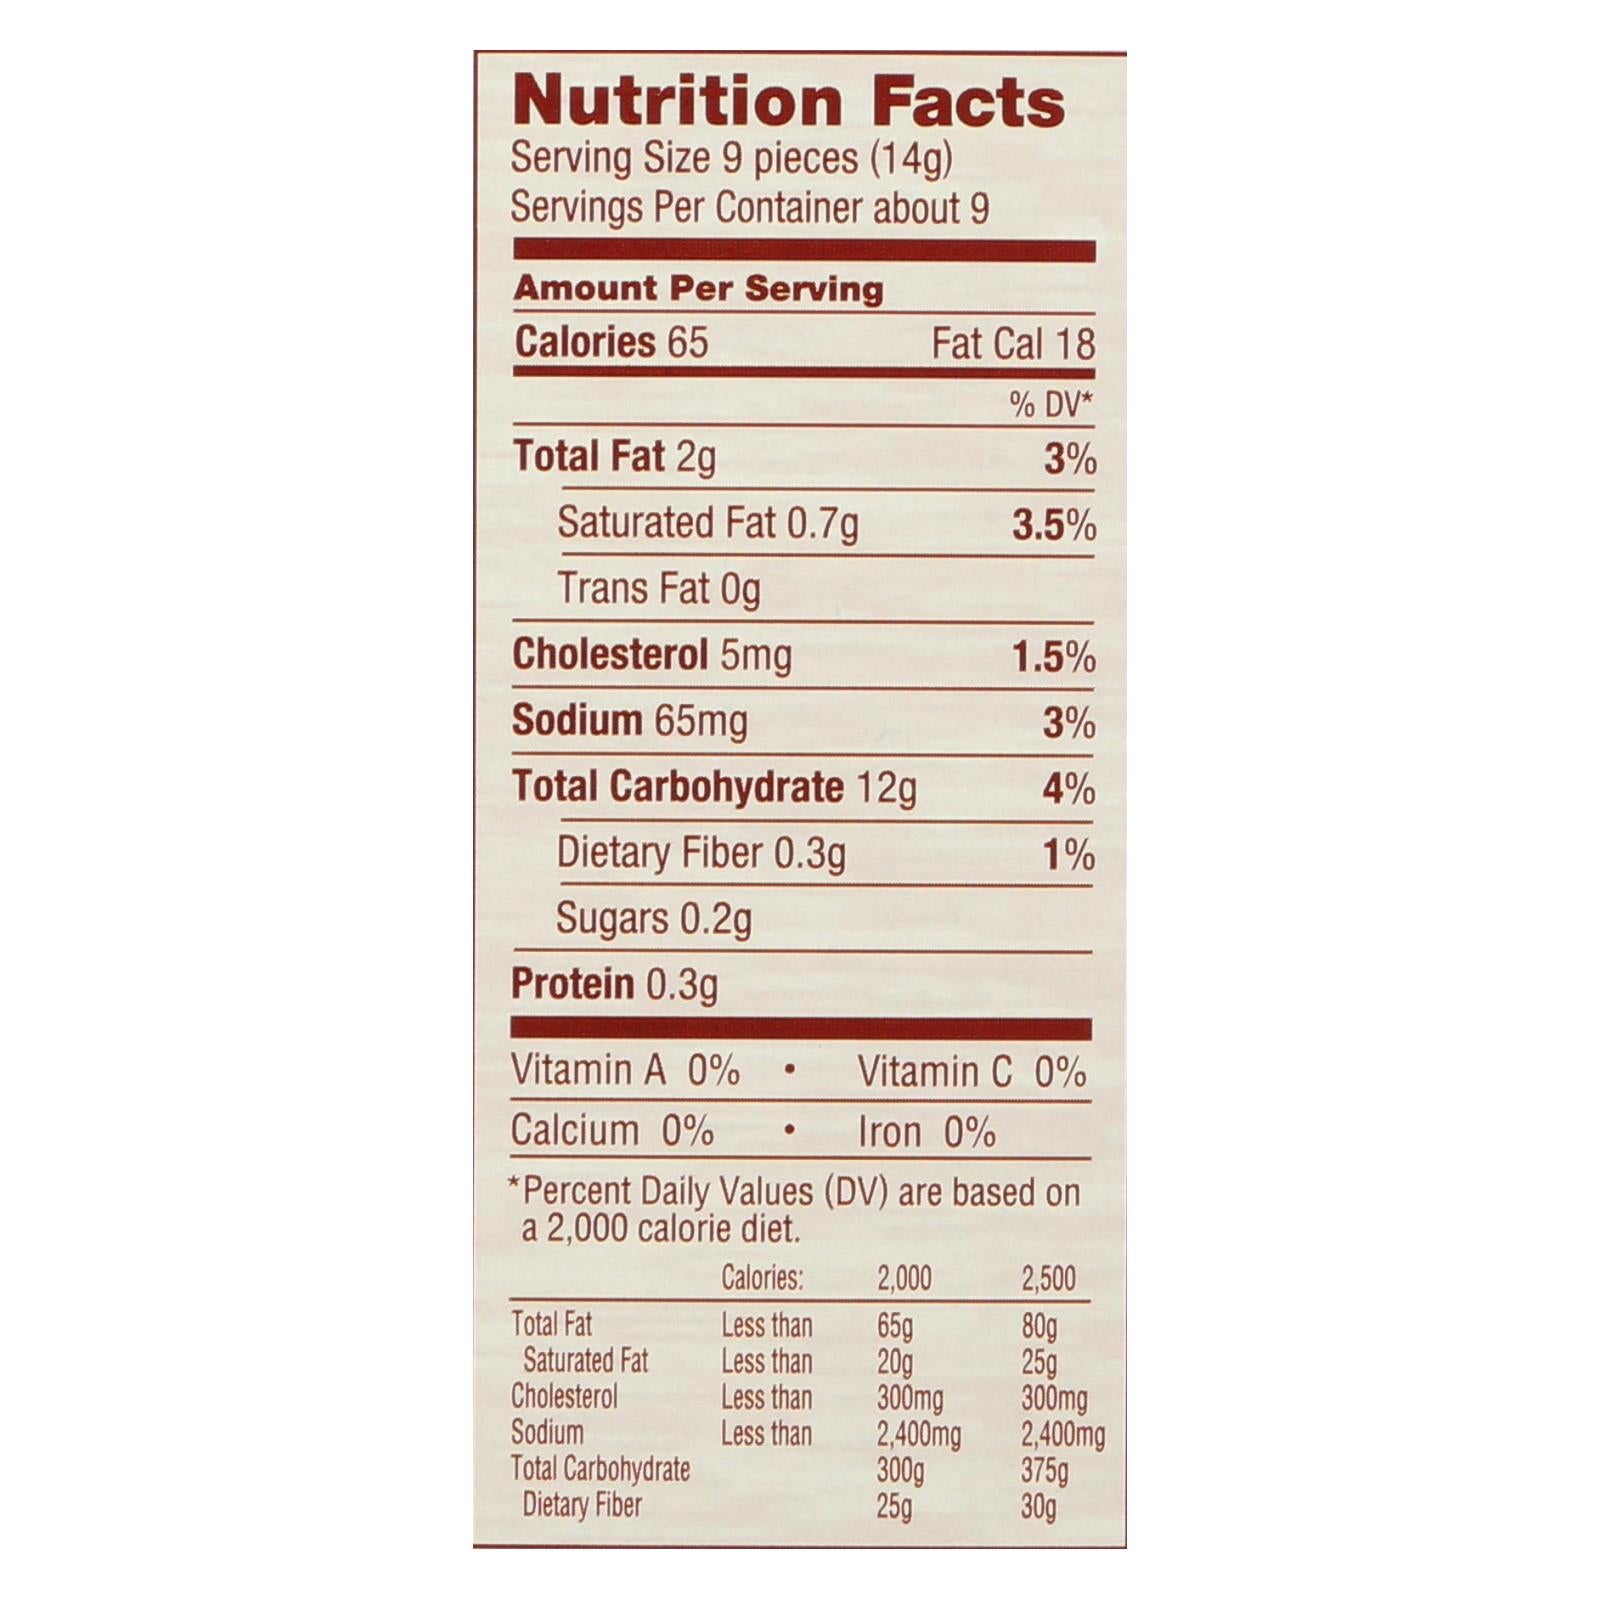 Absolutely Gluten Free - Crackers - Original - Case Of 12 - 4.4 Oz.